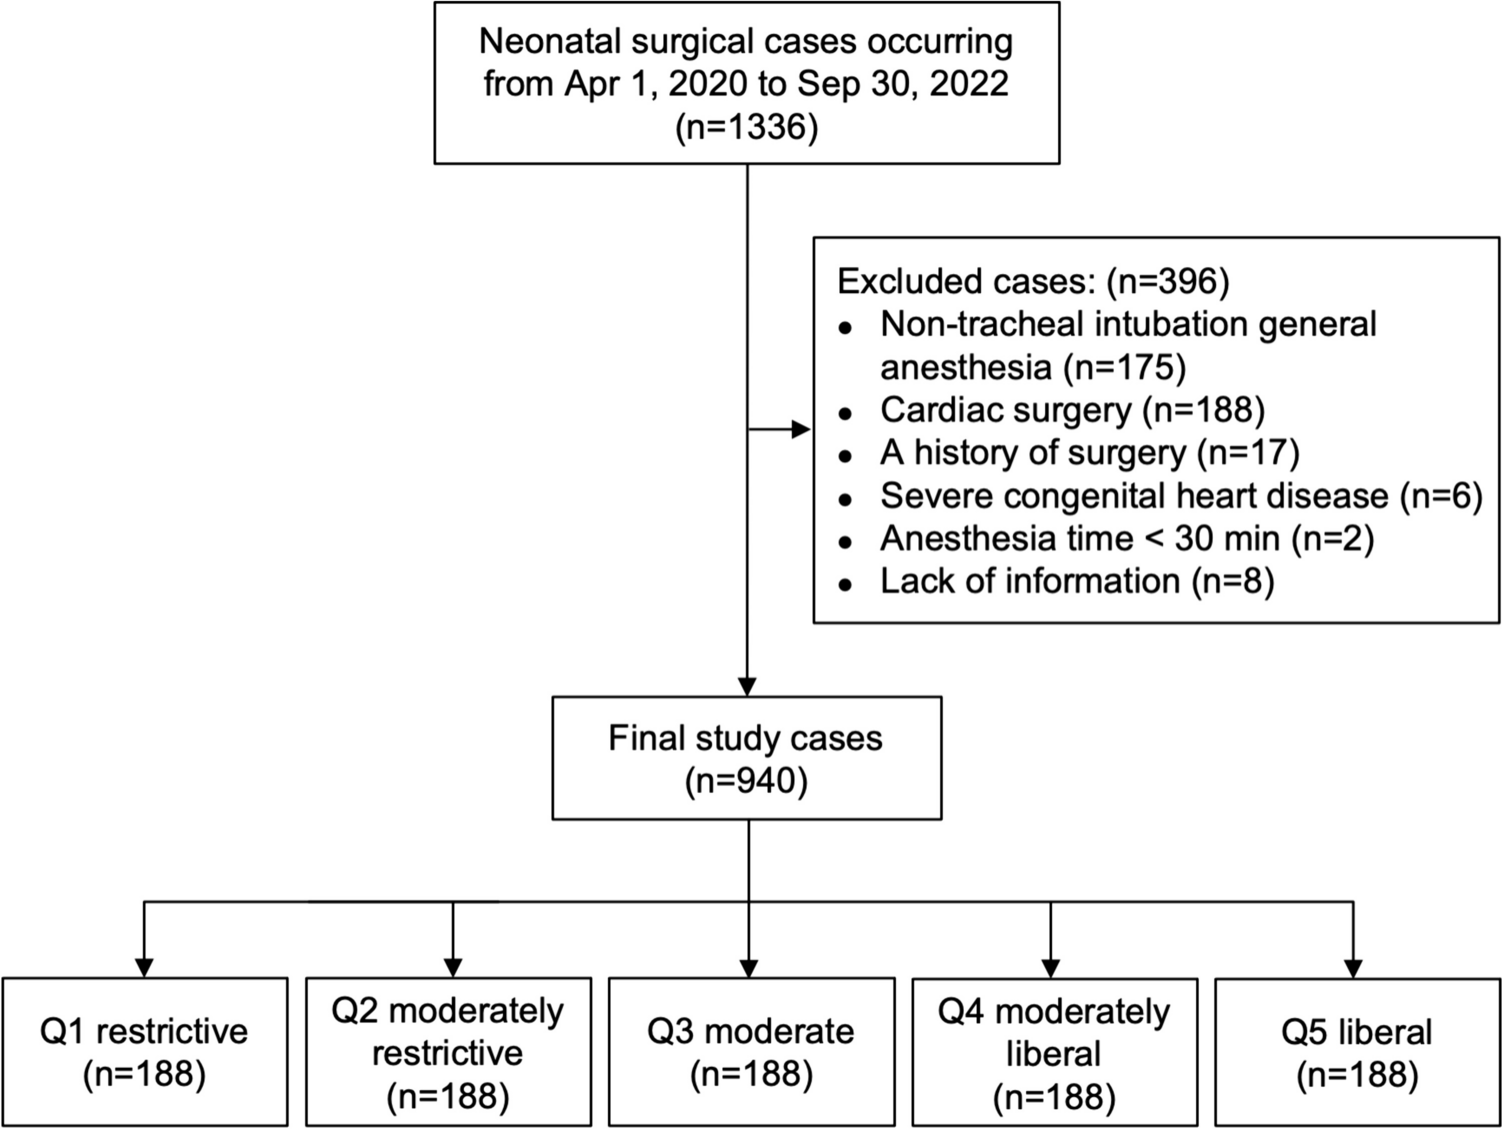 High intraoperative fluid load associated with prolonged length of hospital stay and complications after non-cardiac surgery in neonates